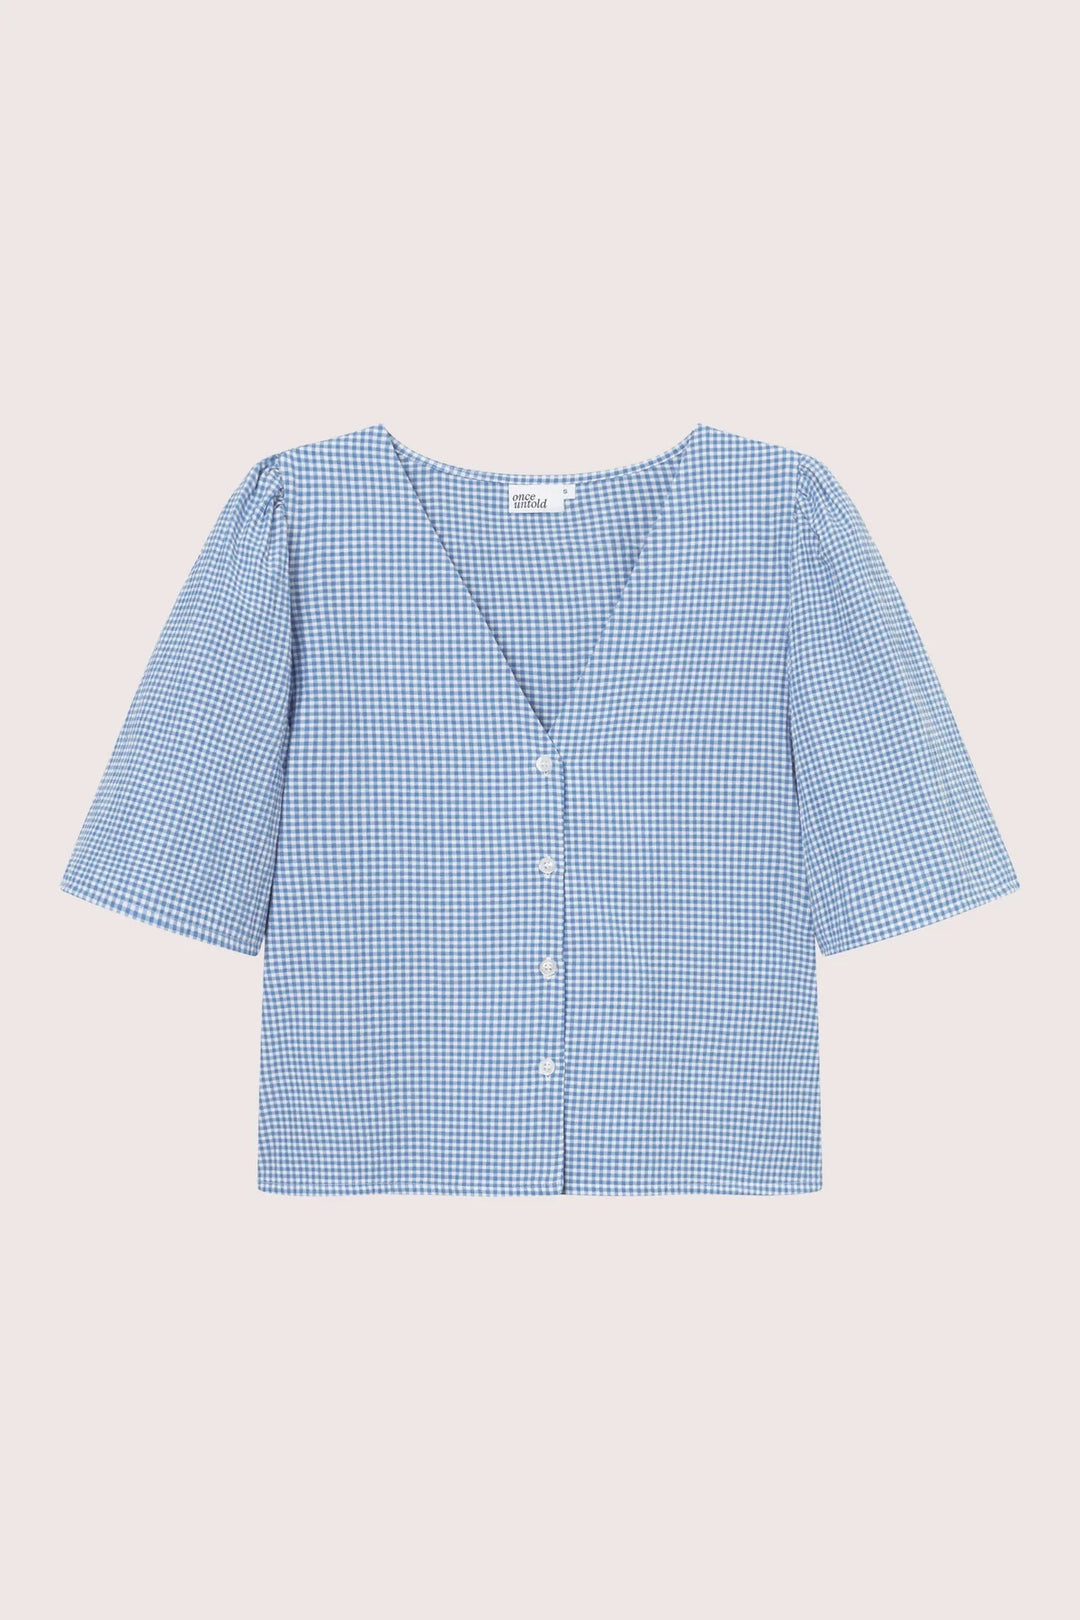 Indiana Button Shirt  Blue Checked